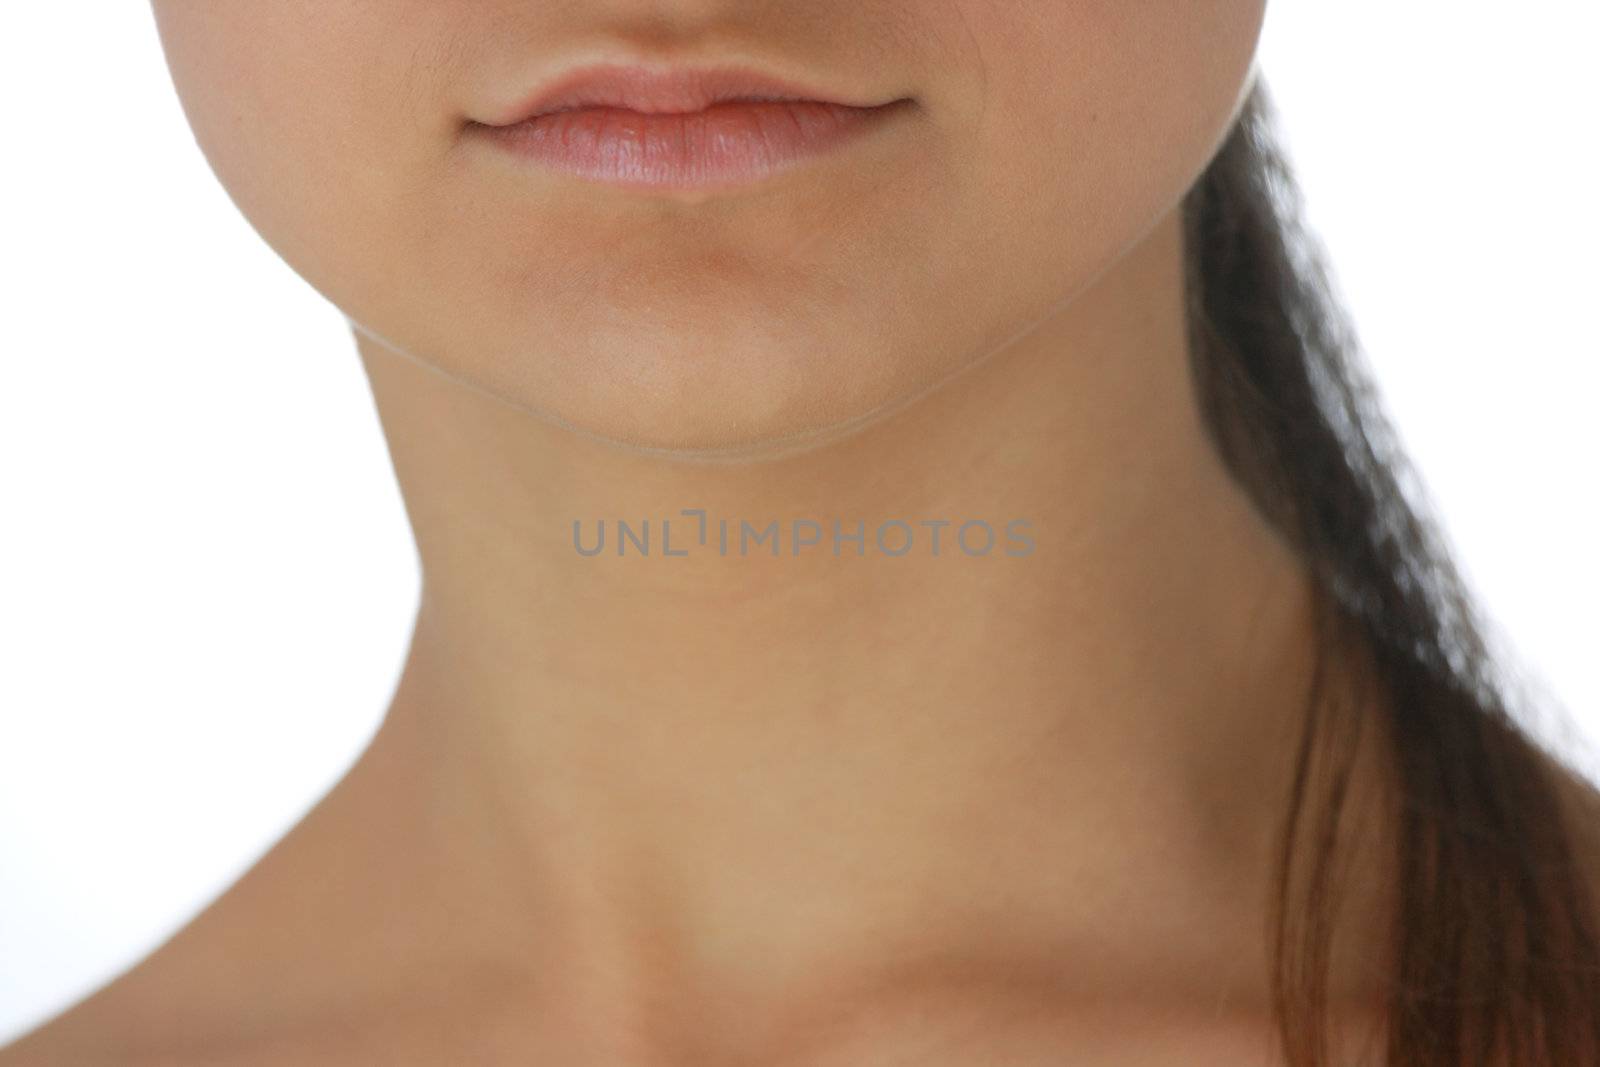 Portrait of young woman with health skin of face isolated on white background